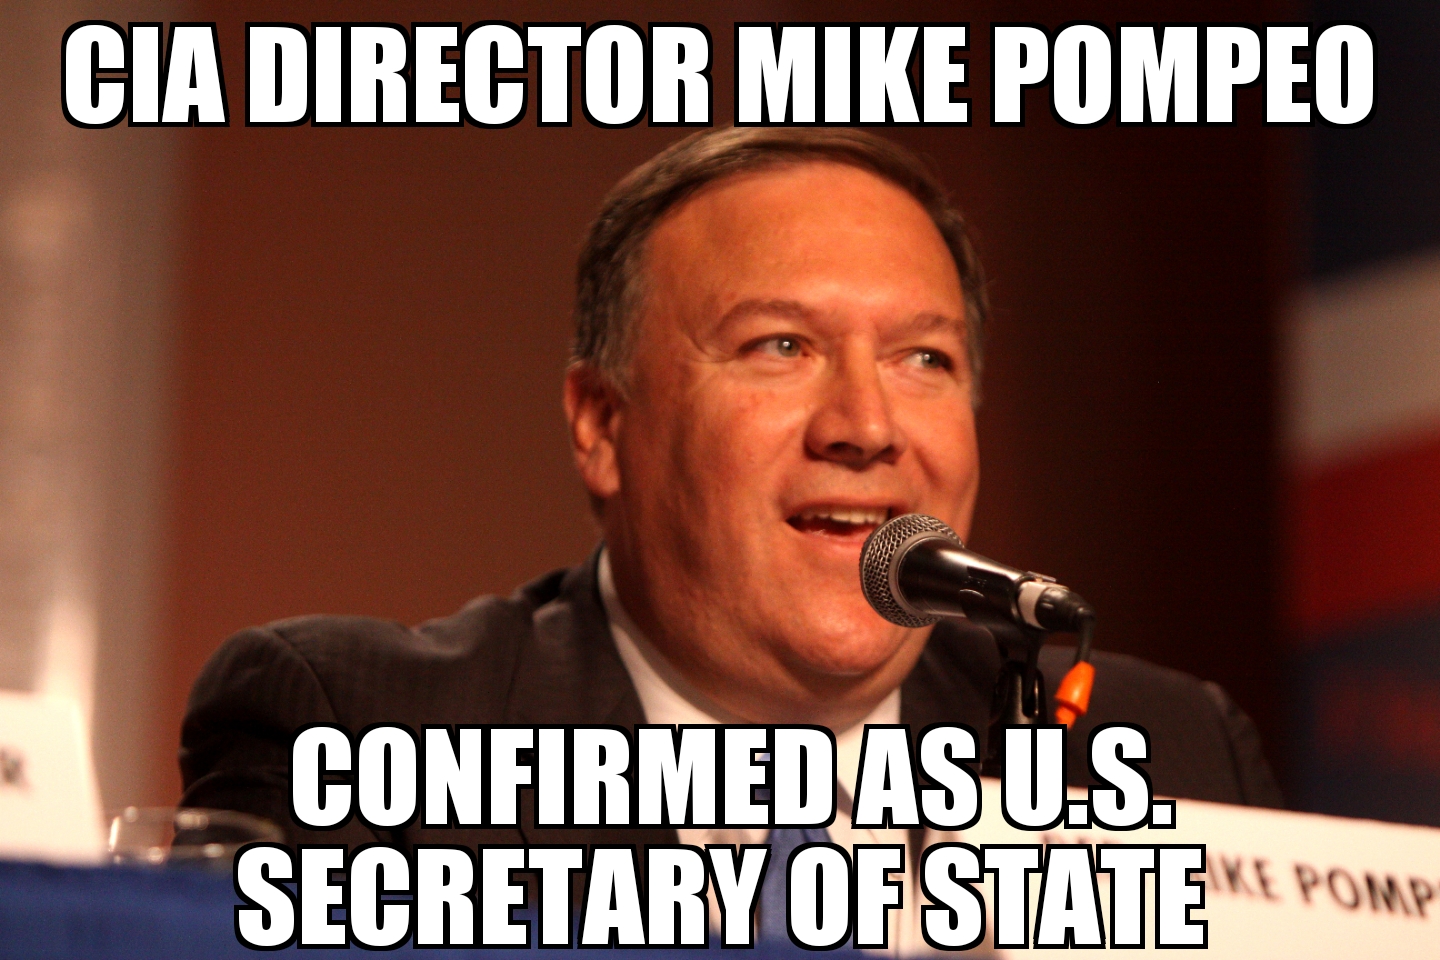 Mike Pompeo confirmed as Secretary of State